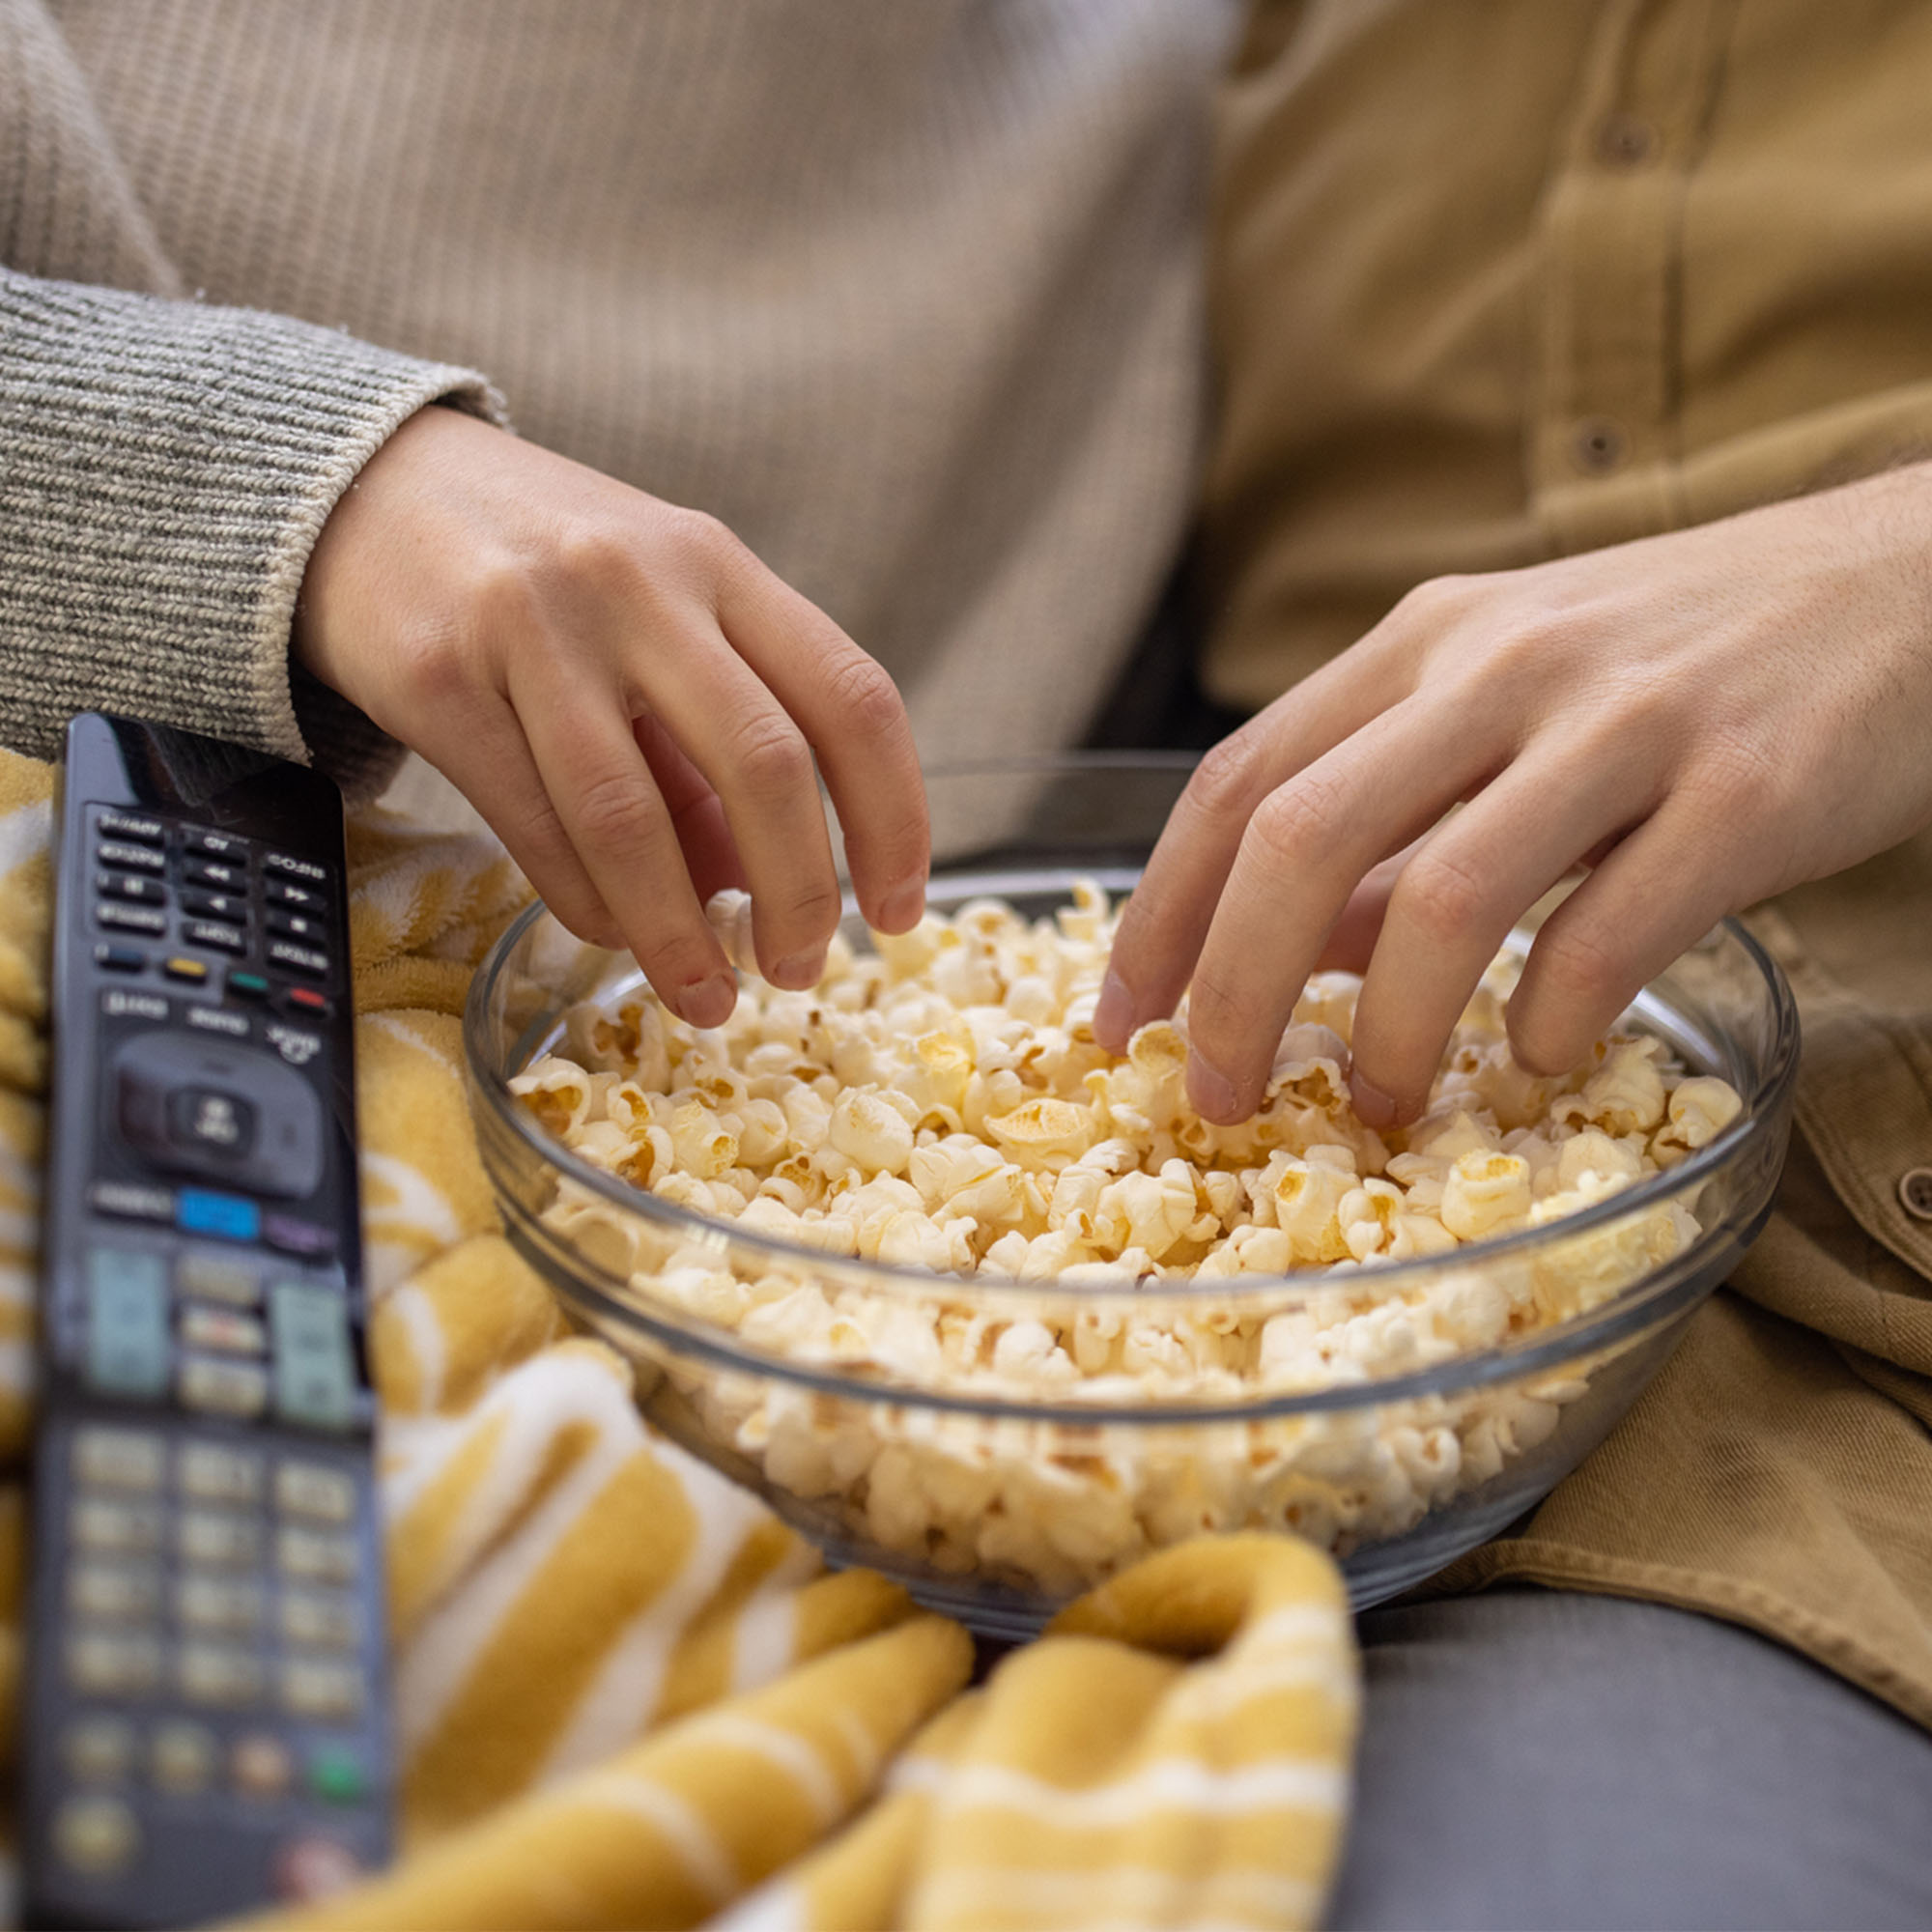 Photo: two hands reaching into a full bowl of popcorn. There is a TV remote laying next to the bowl.